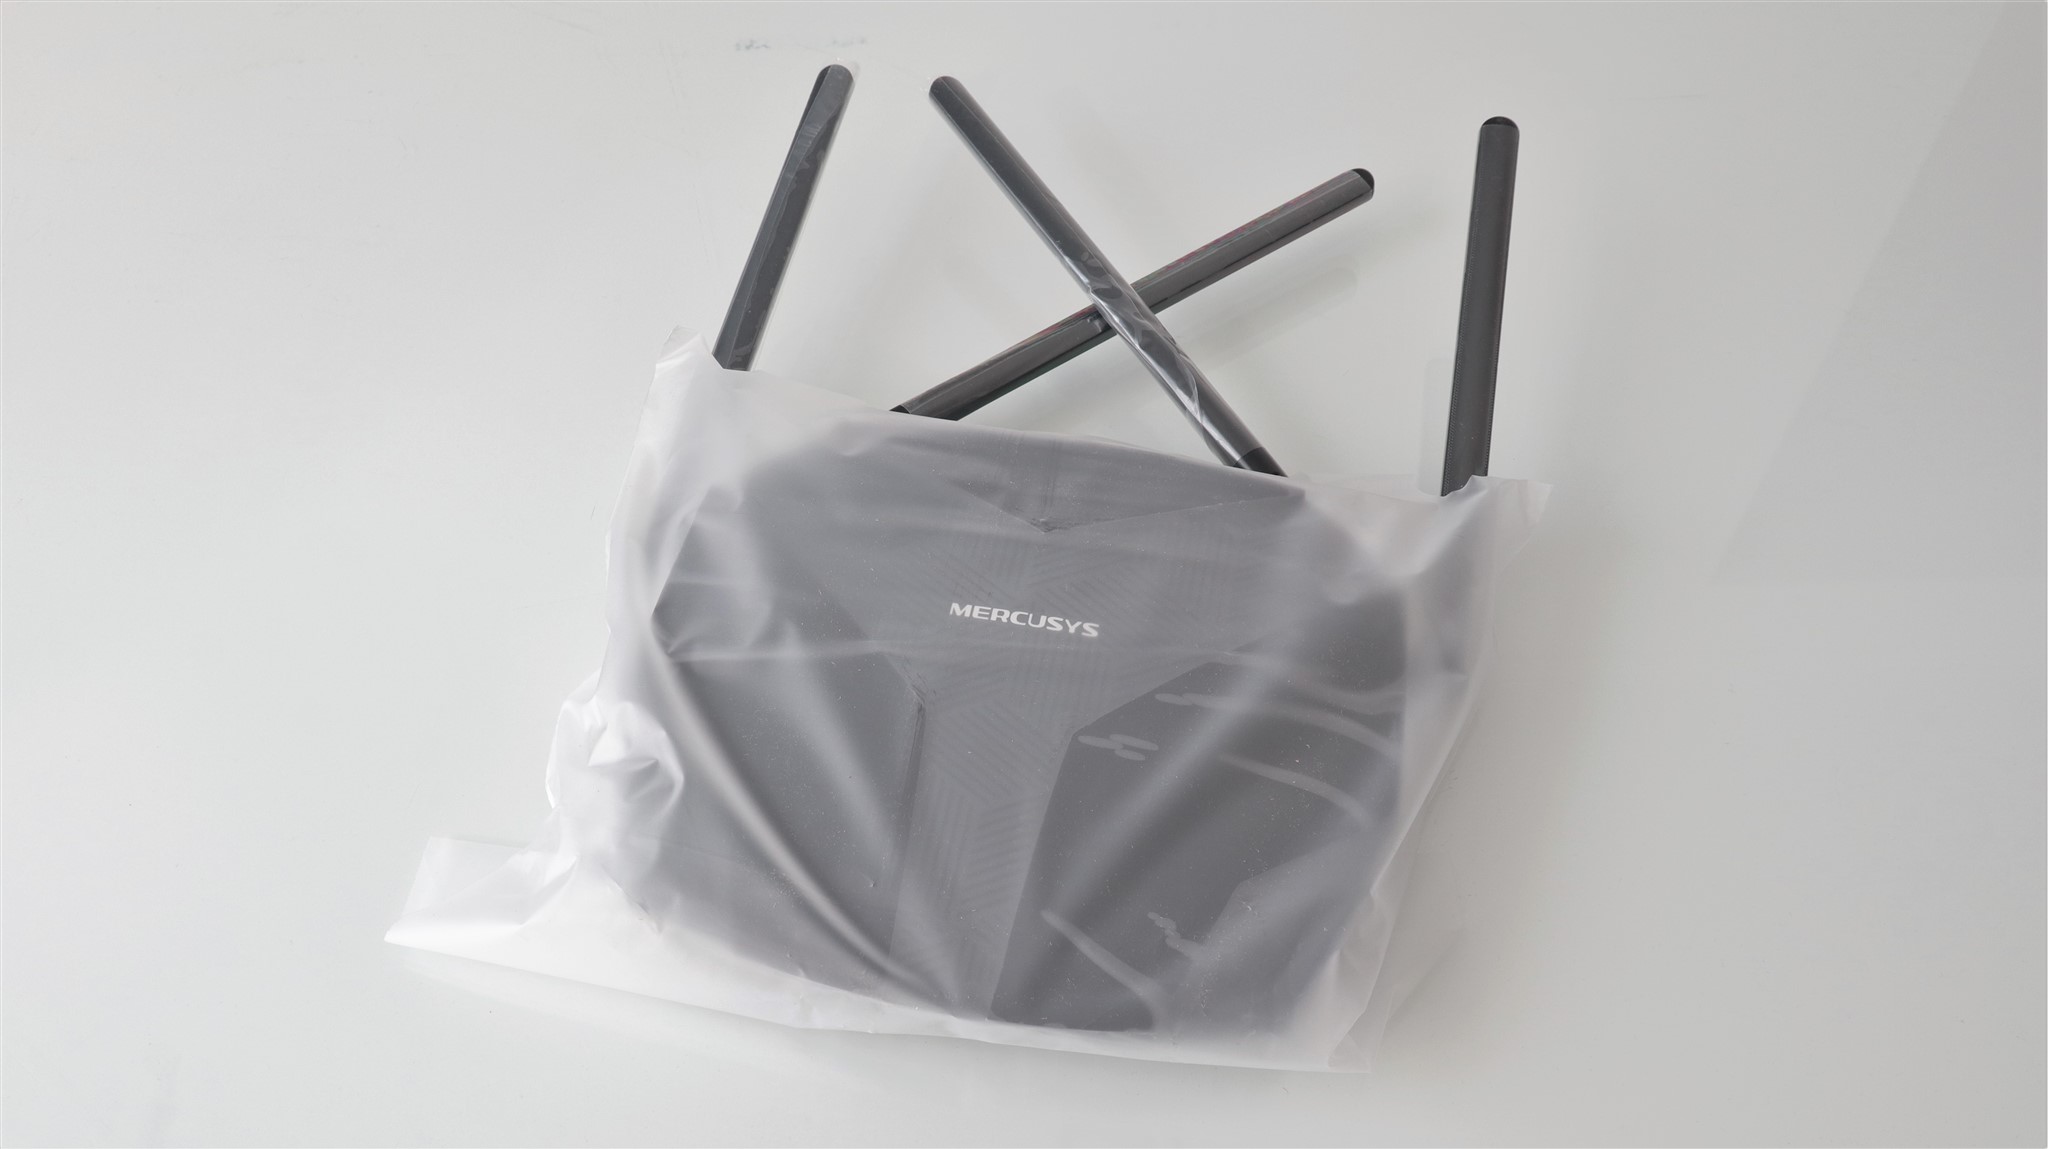 Geek Review: Mercusys MR70X AX1800 Dual-Band WiFi 6 Router